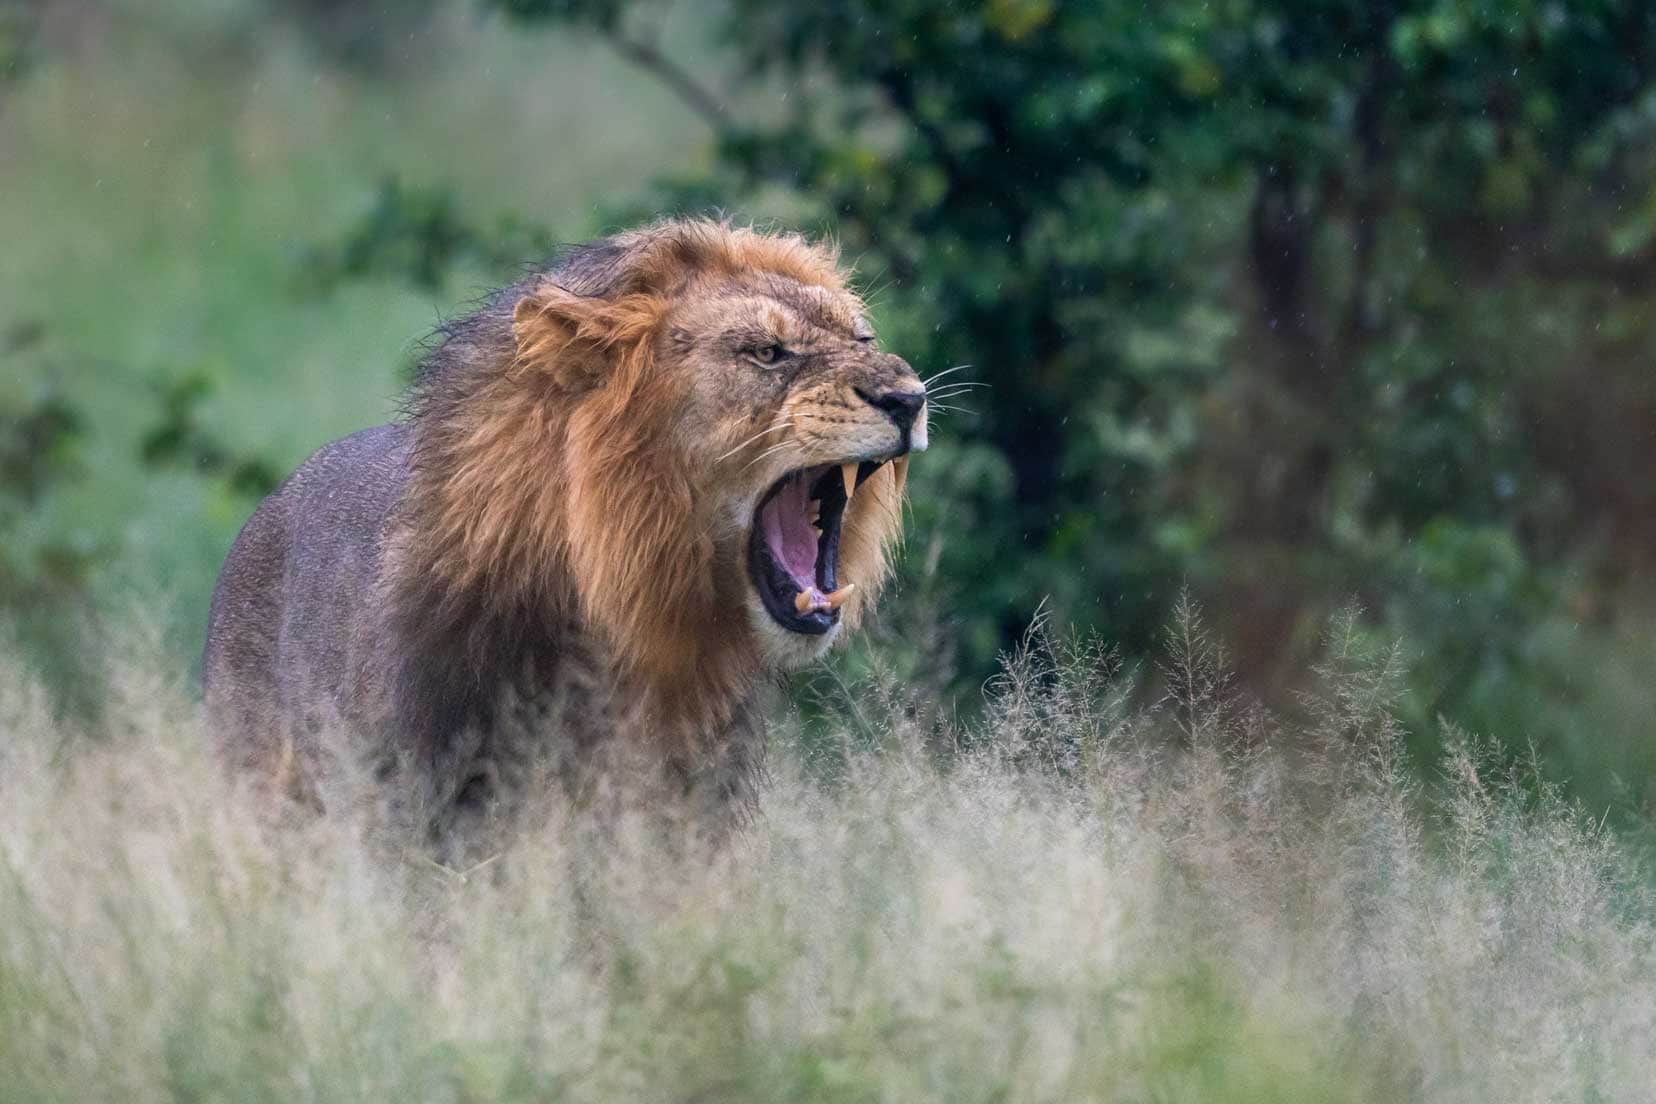 Lion-baring-teeth-in-long-grass in Moremi game reserve